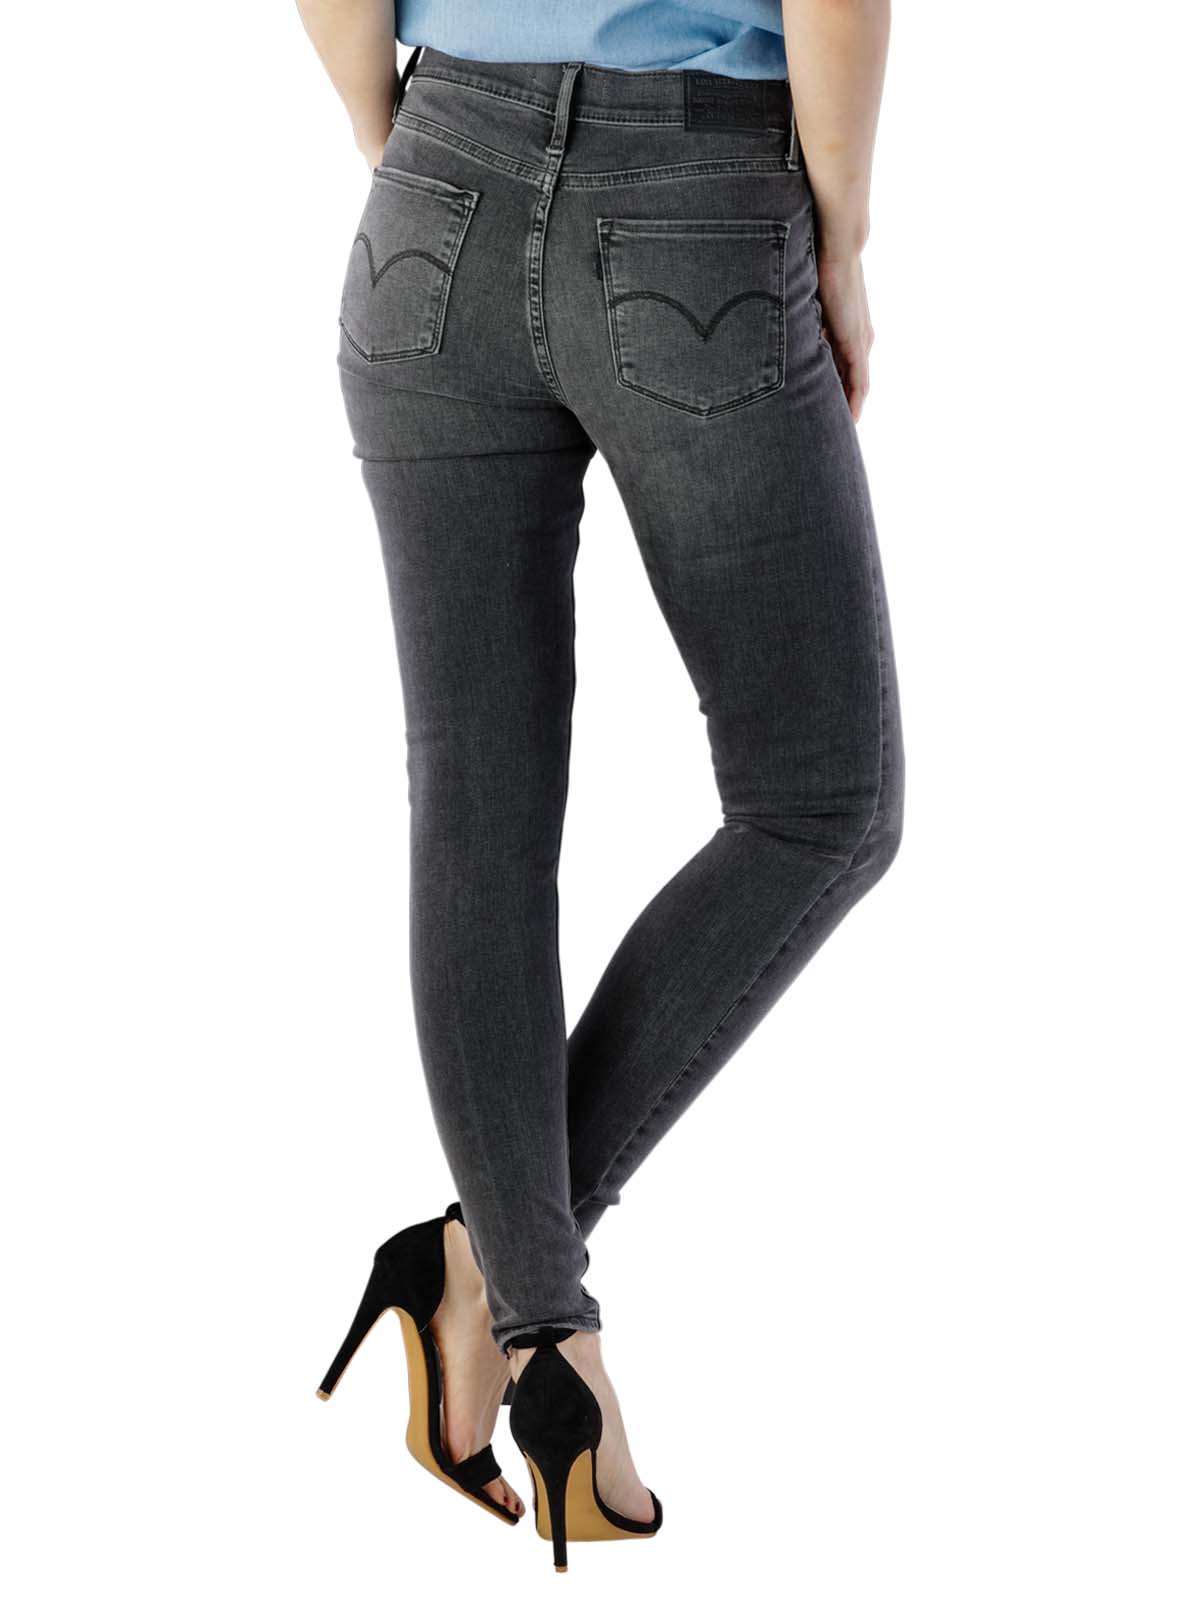 Levi's 720 High Rise Super Skinny Jeans fingers crossed Levi's Women's Jeans  | Free Shipping on  - SIMPLY LOOK GOOD